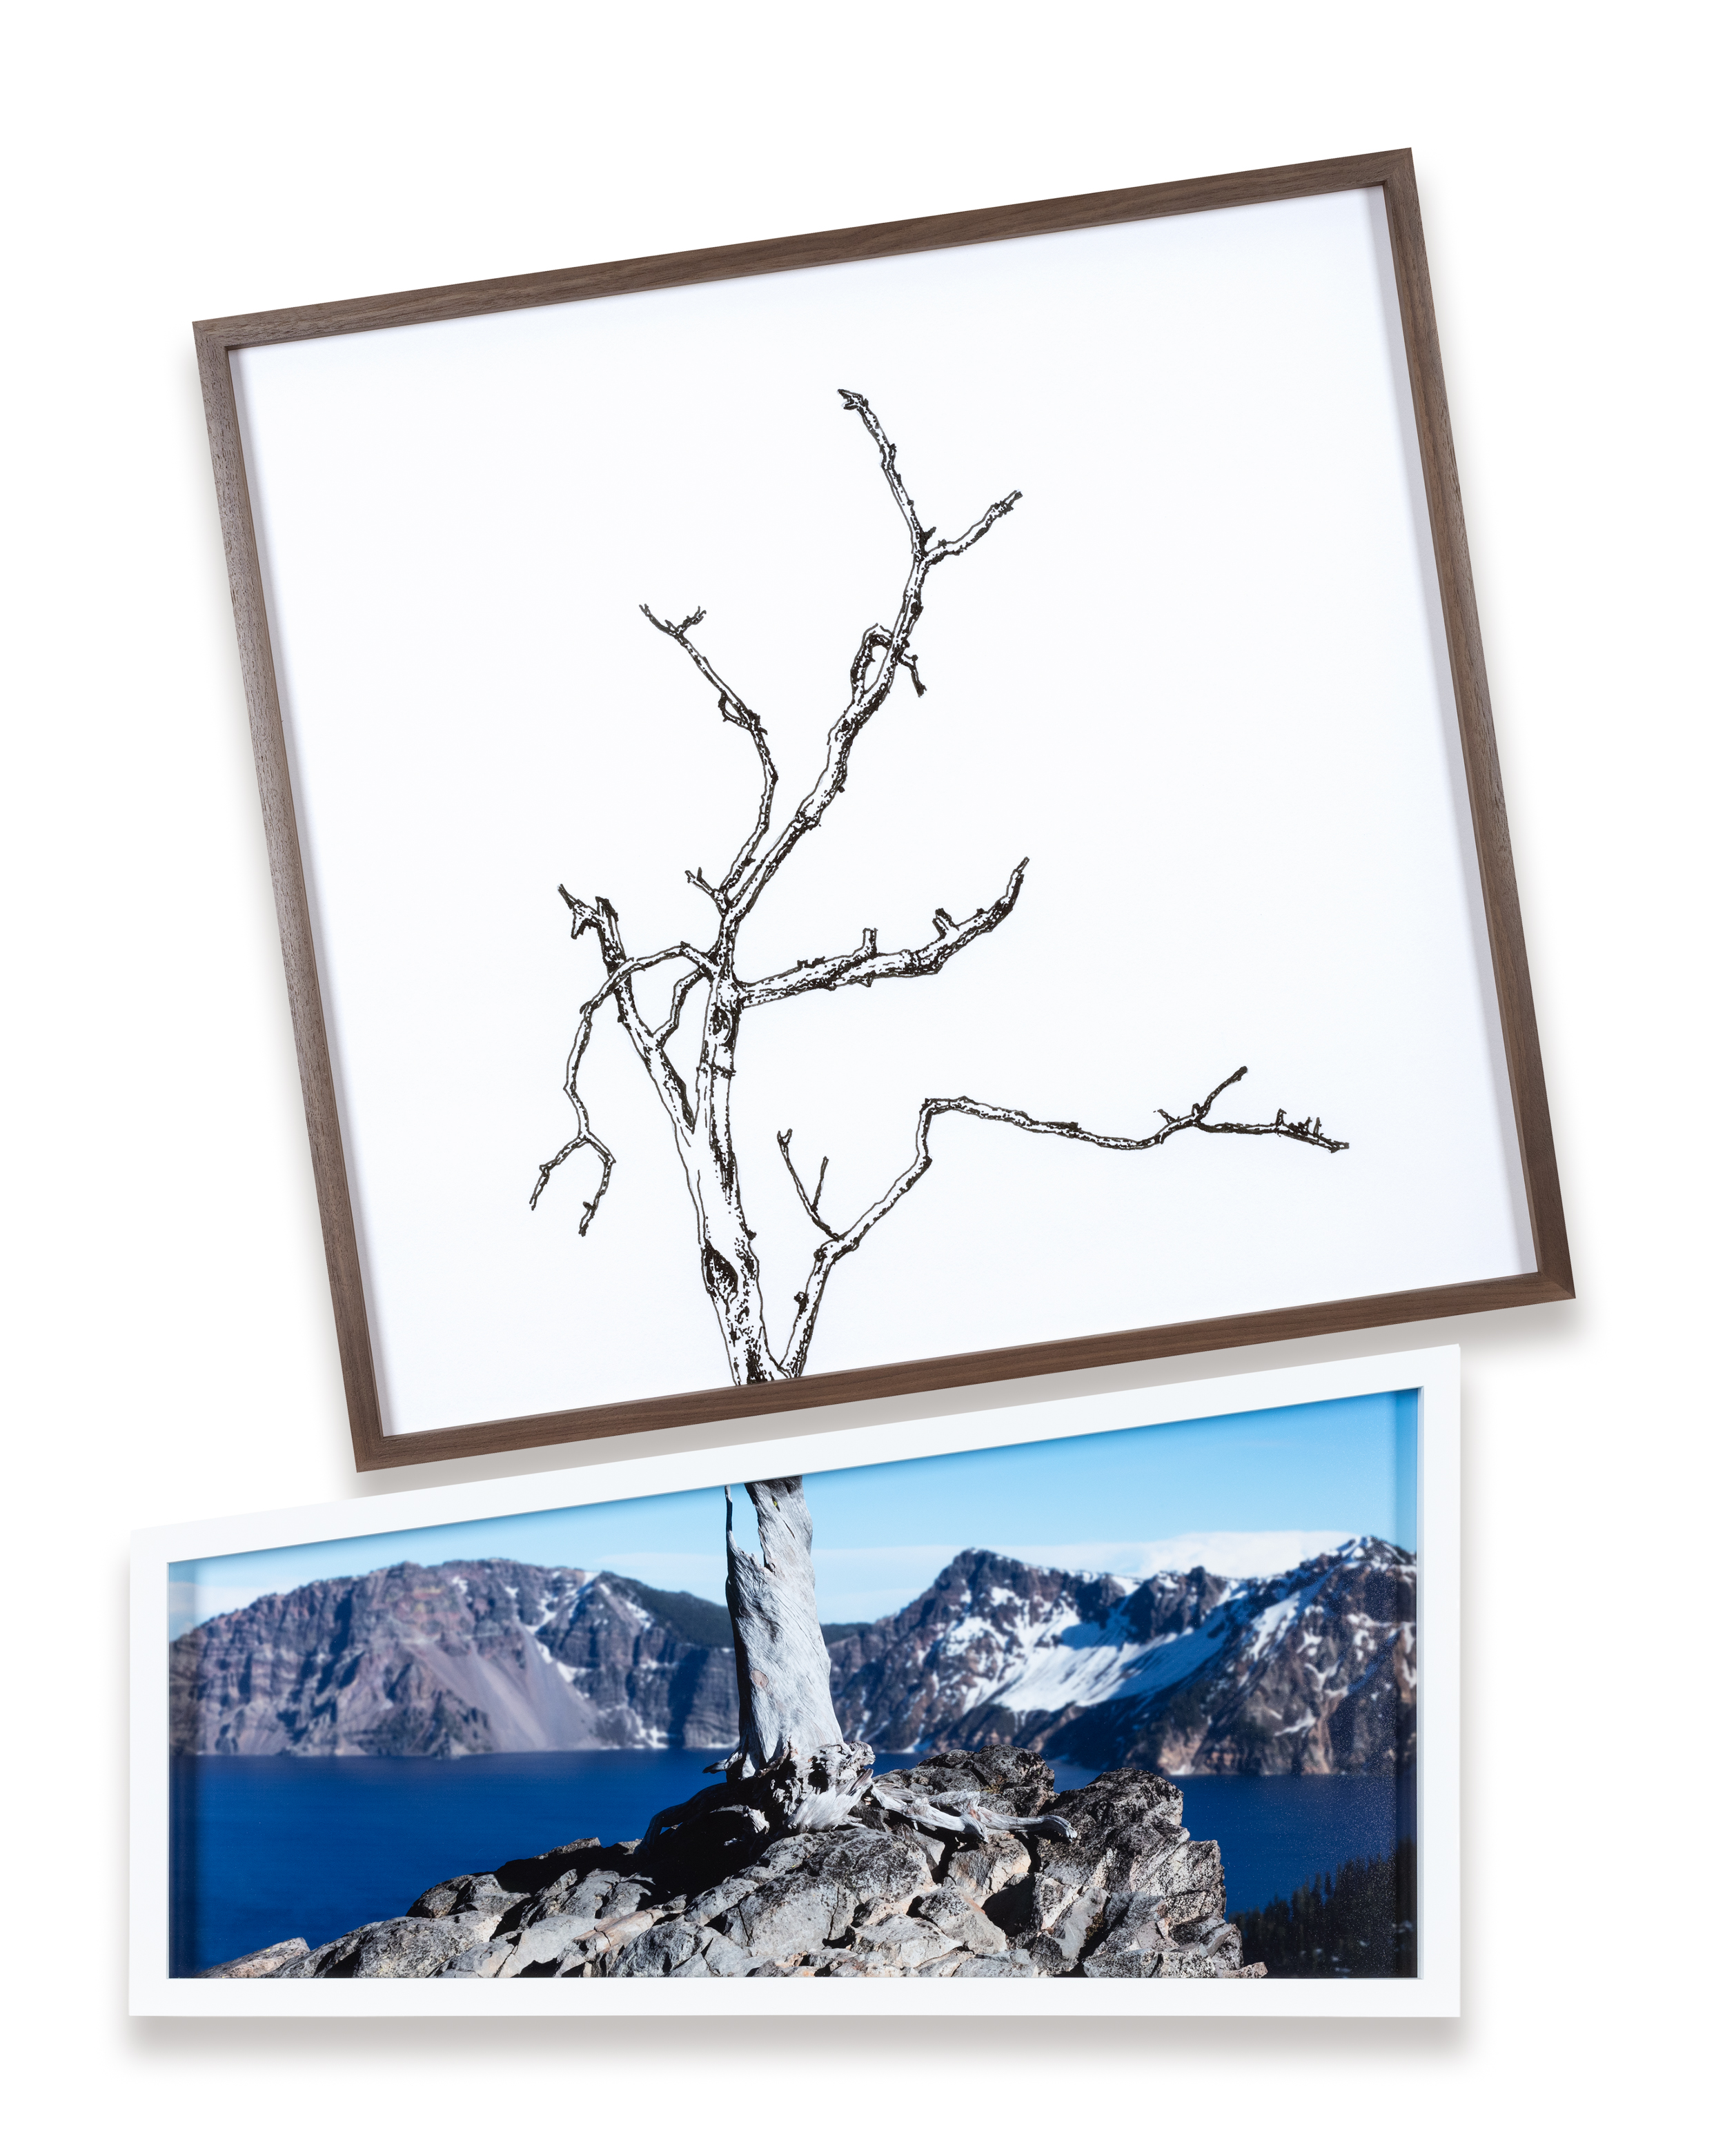 Color image of a diptych depicting a bare tree amongst the landscape with the top half being an illustration against white background and the bottom half a color photograph